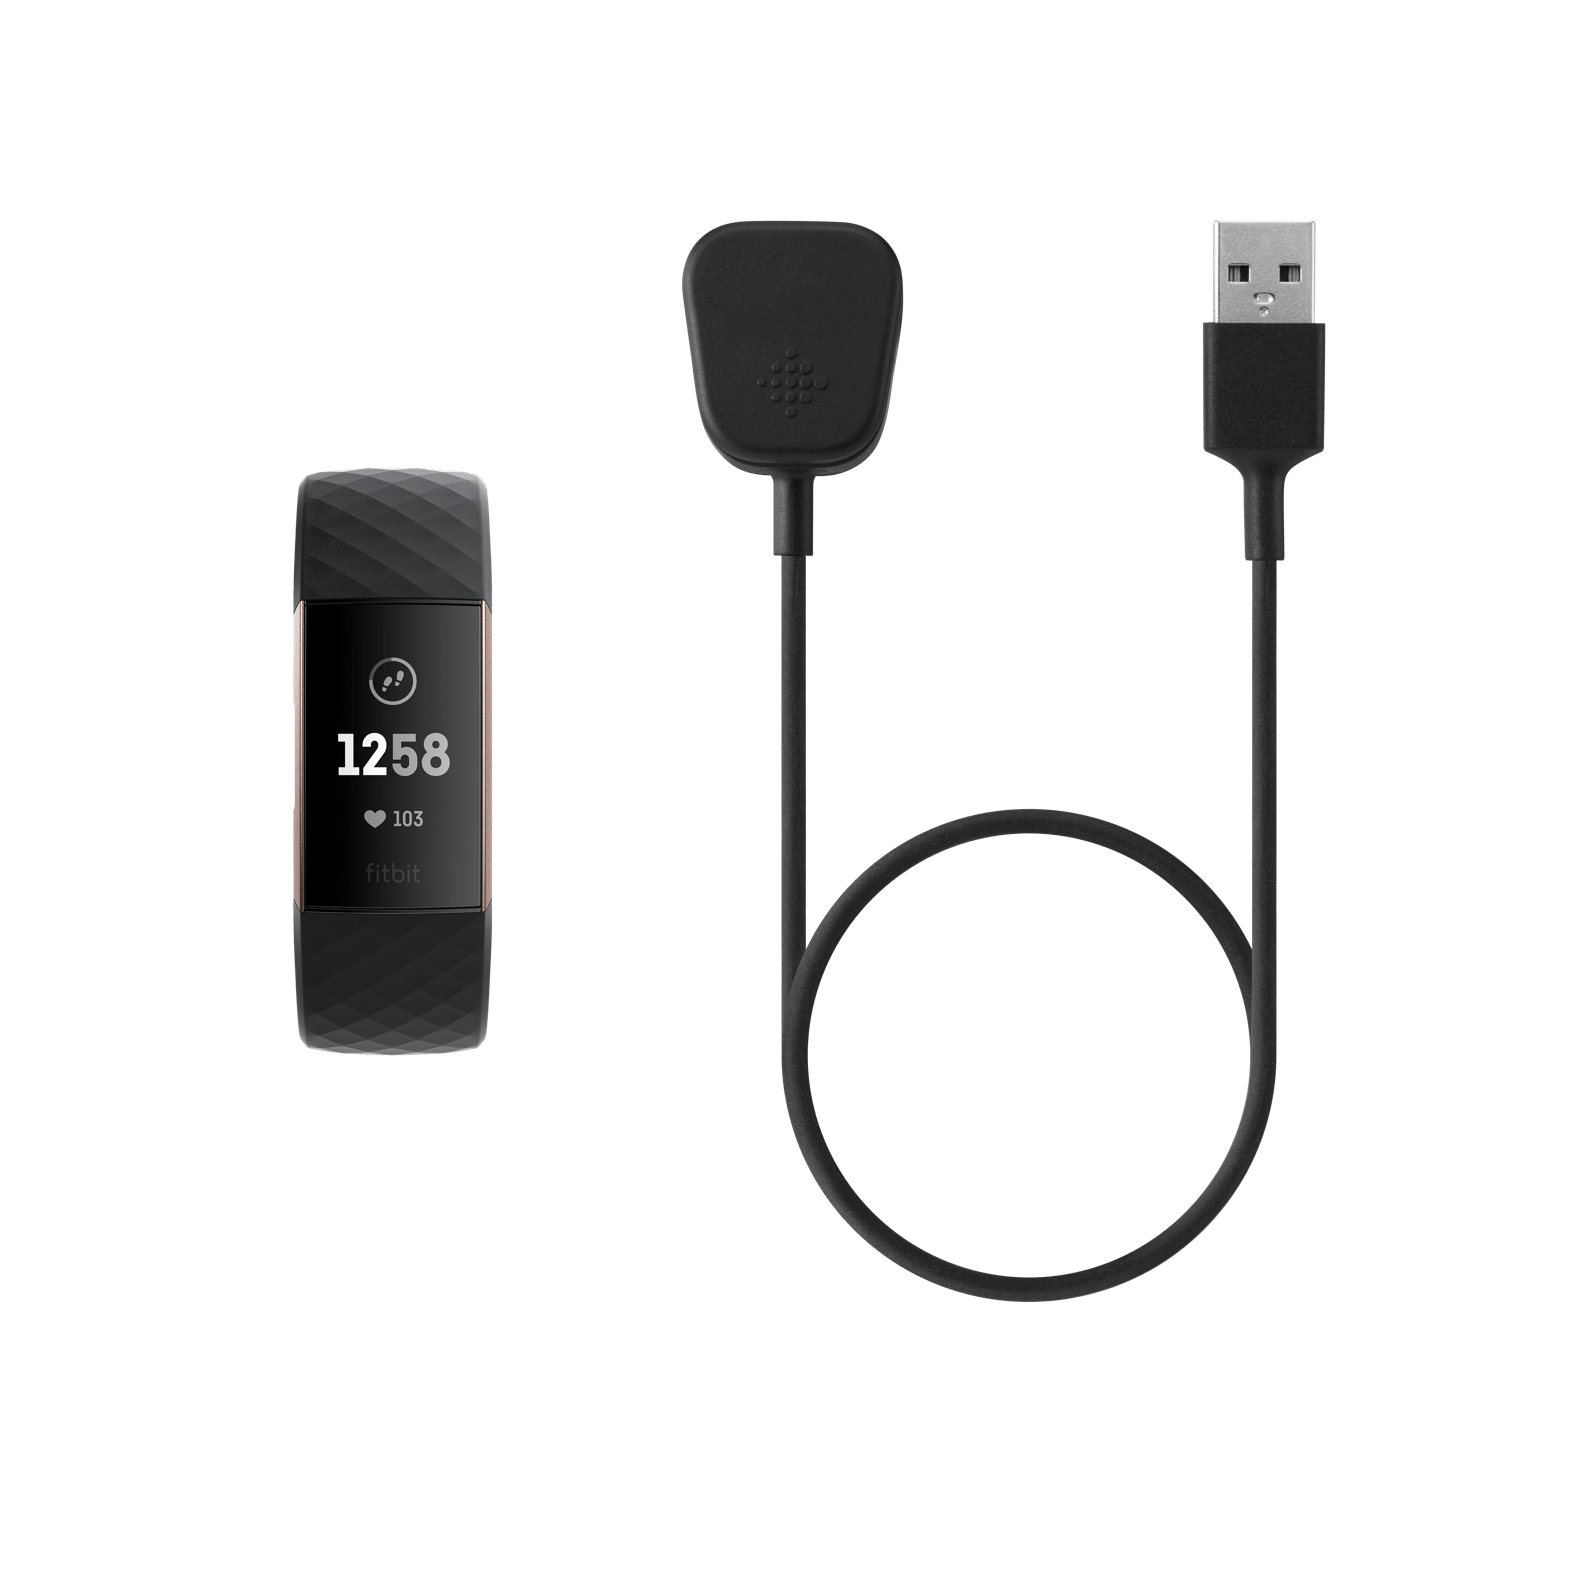 charger for fitbit 3